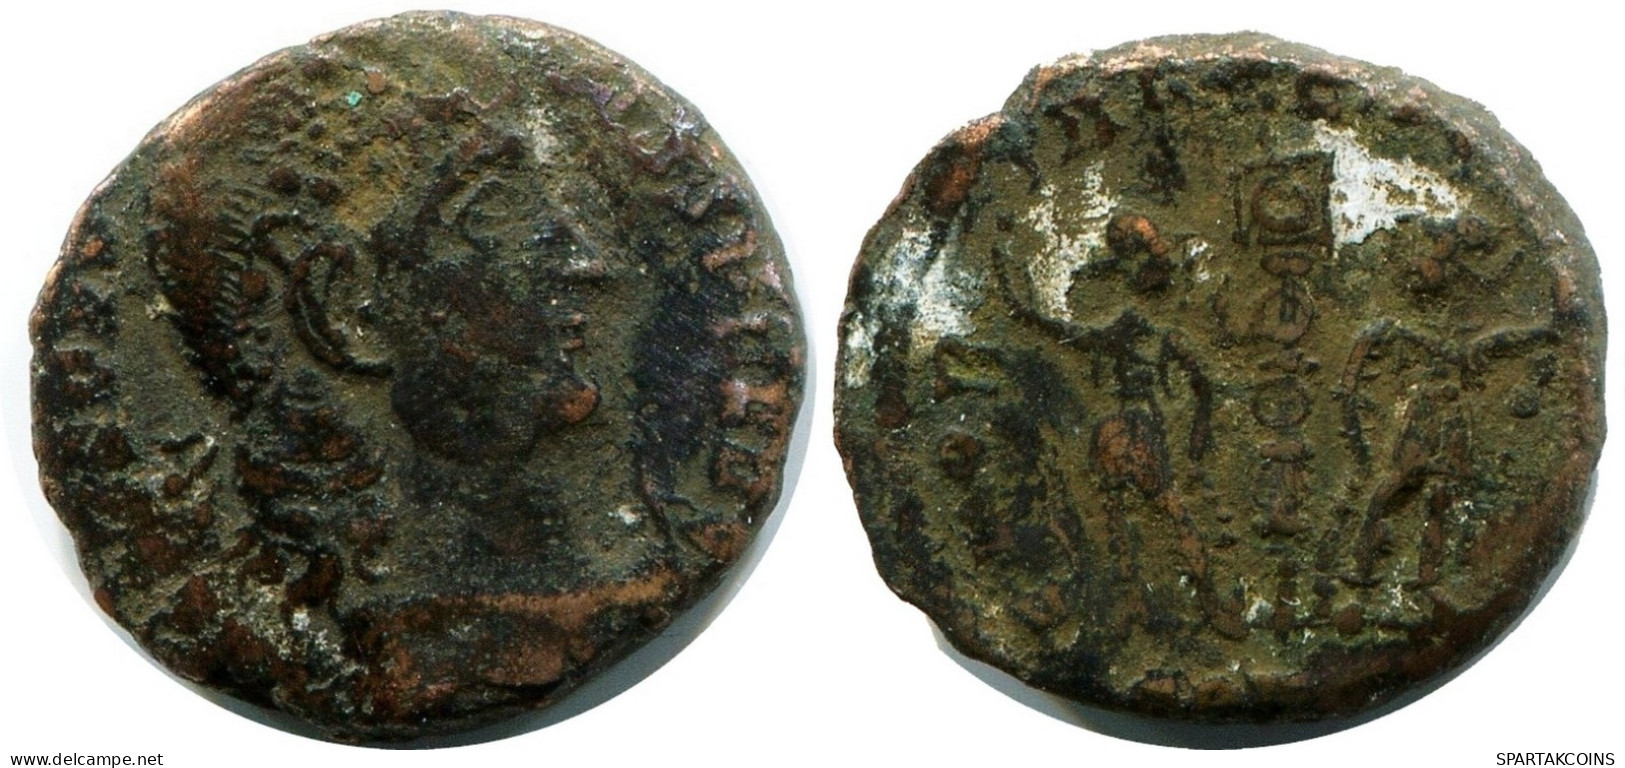 CONSTANS MINTED IN CONSTANTINOPLE FROM THE ROYAL ONTARIO MUSEUM #ANC11923.14.U.A - The Christian Empire (307 AD To 363 AD)